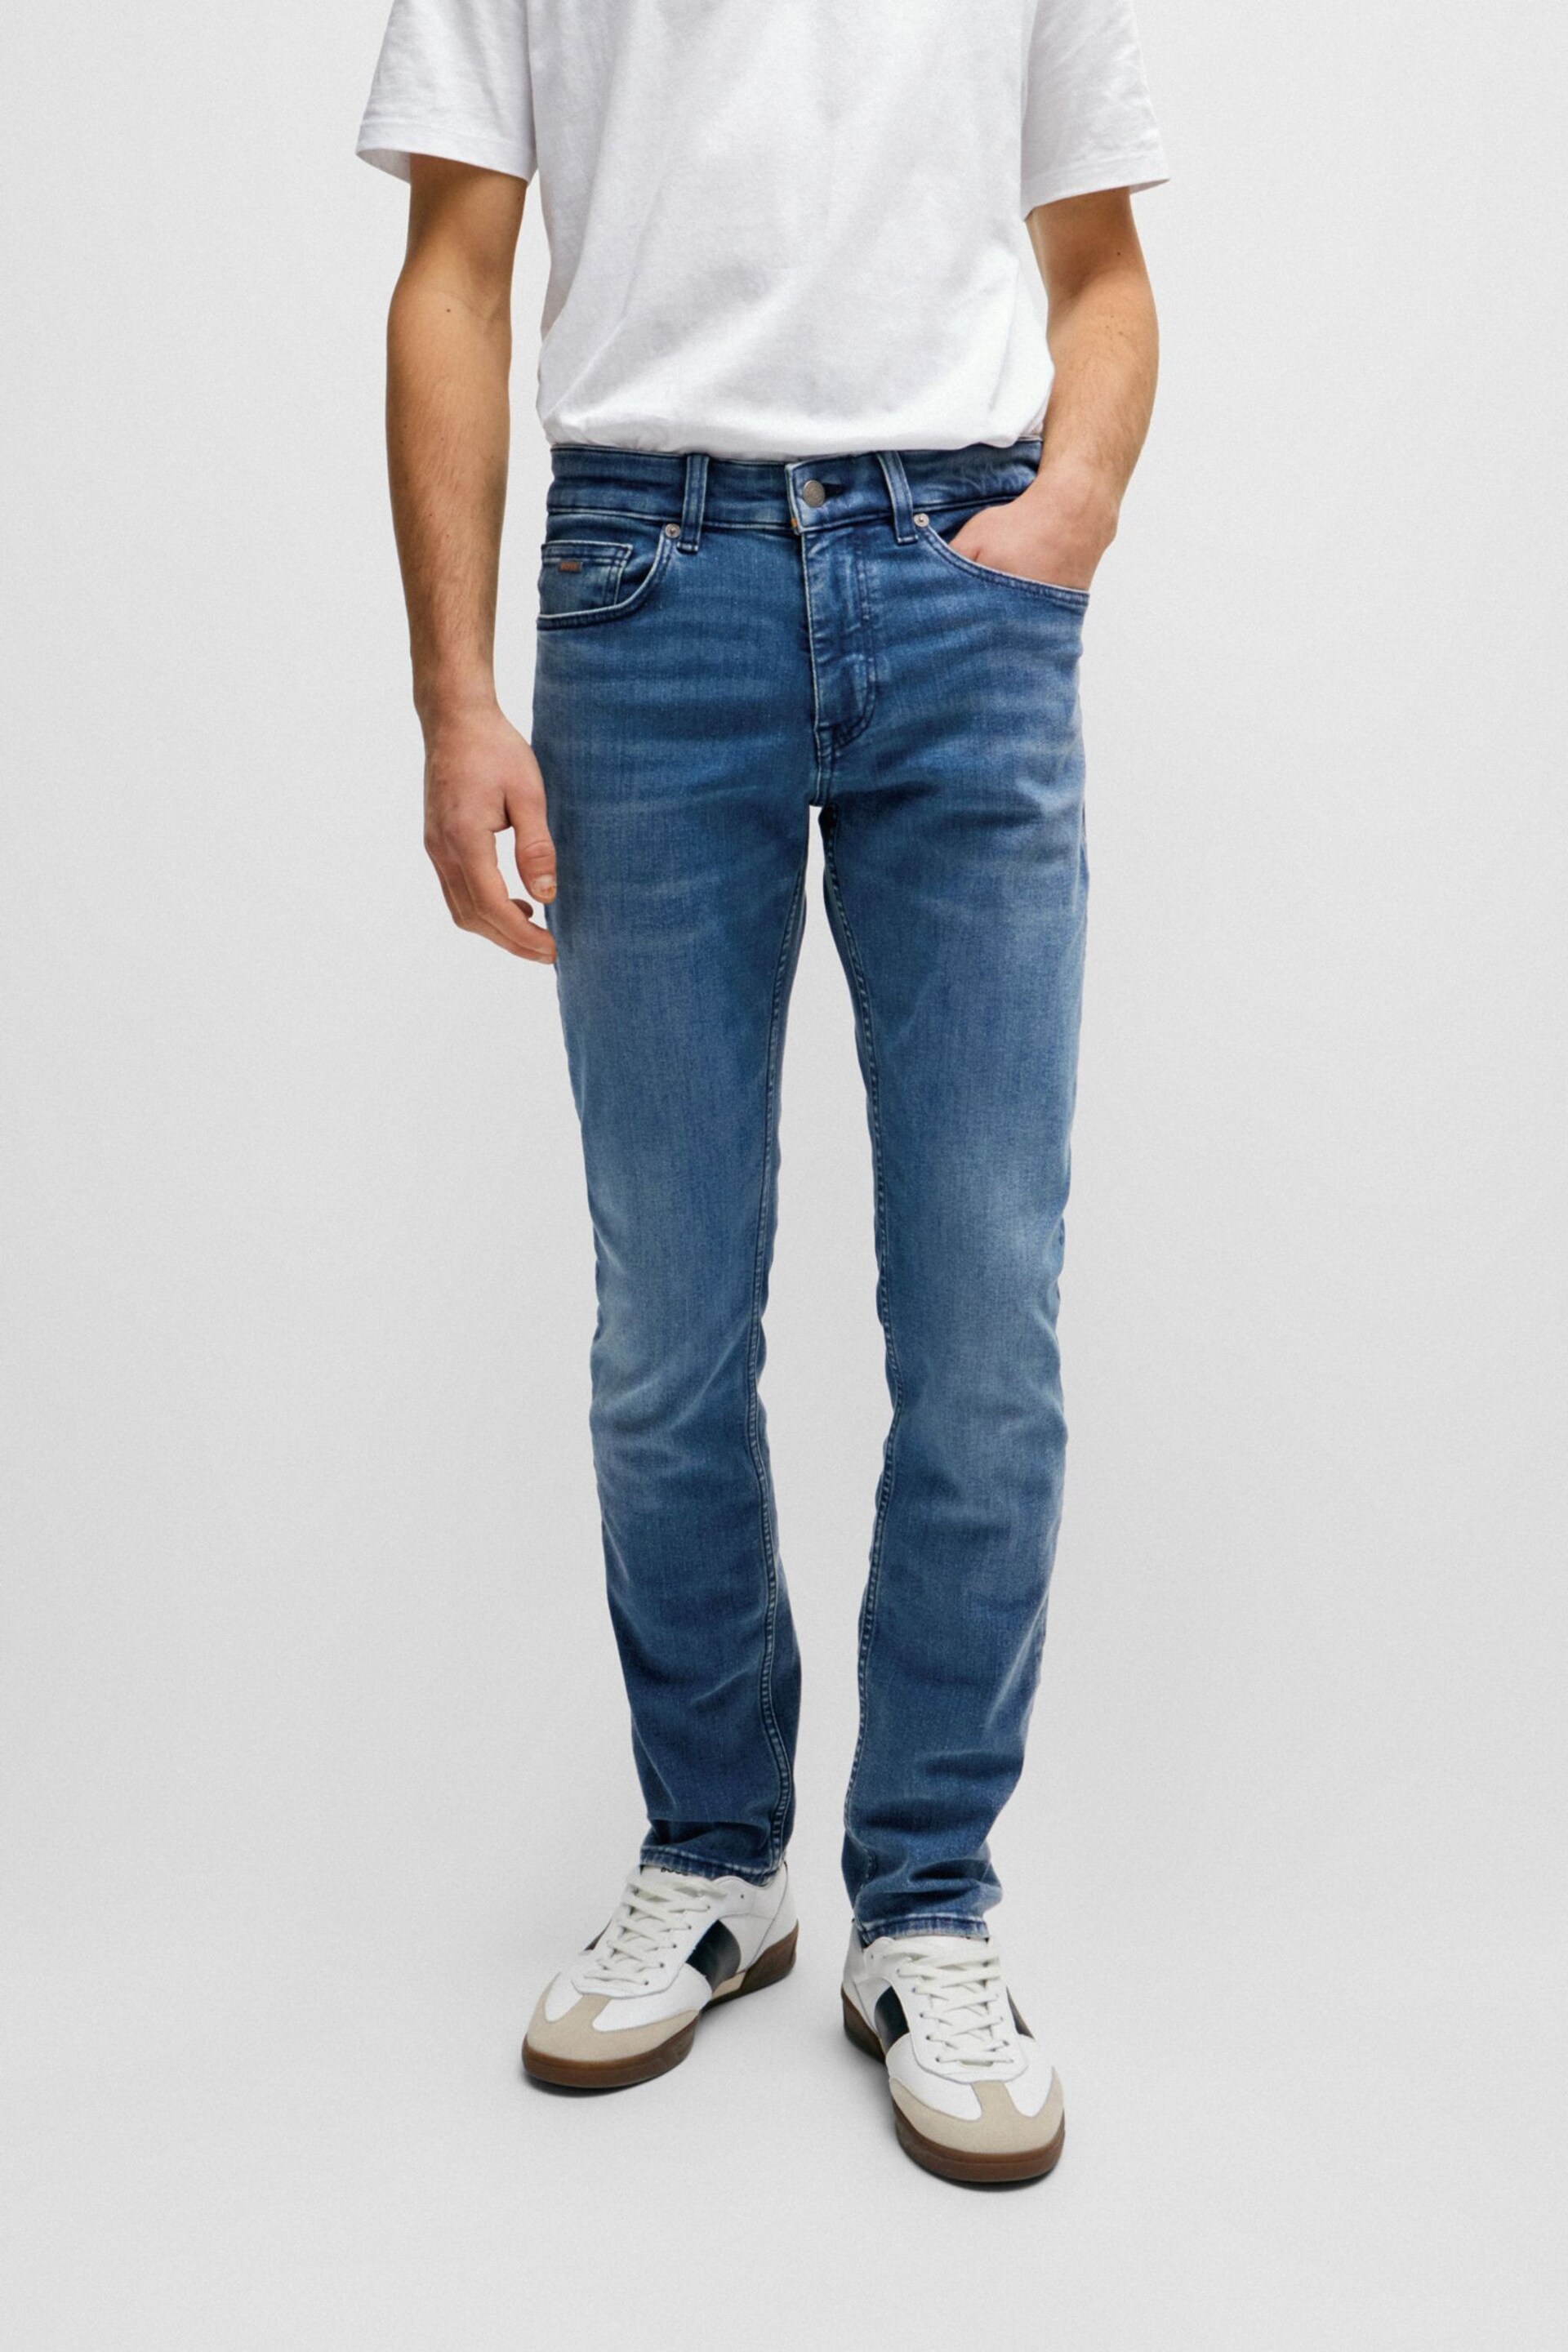 BOSS Mid Blue Tapered Fit Super Stretch Denim Jeans - Image 1 of 5